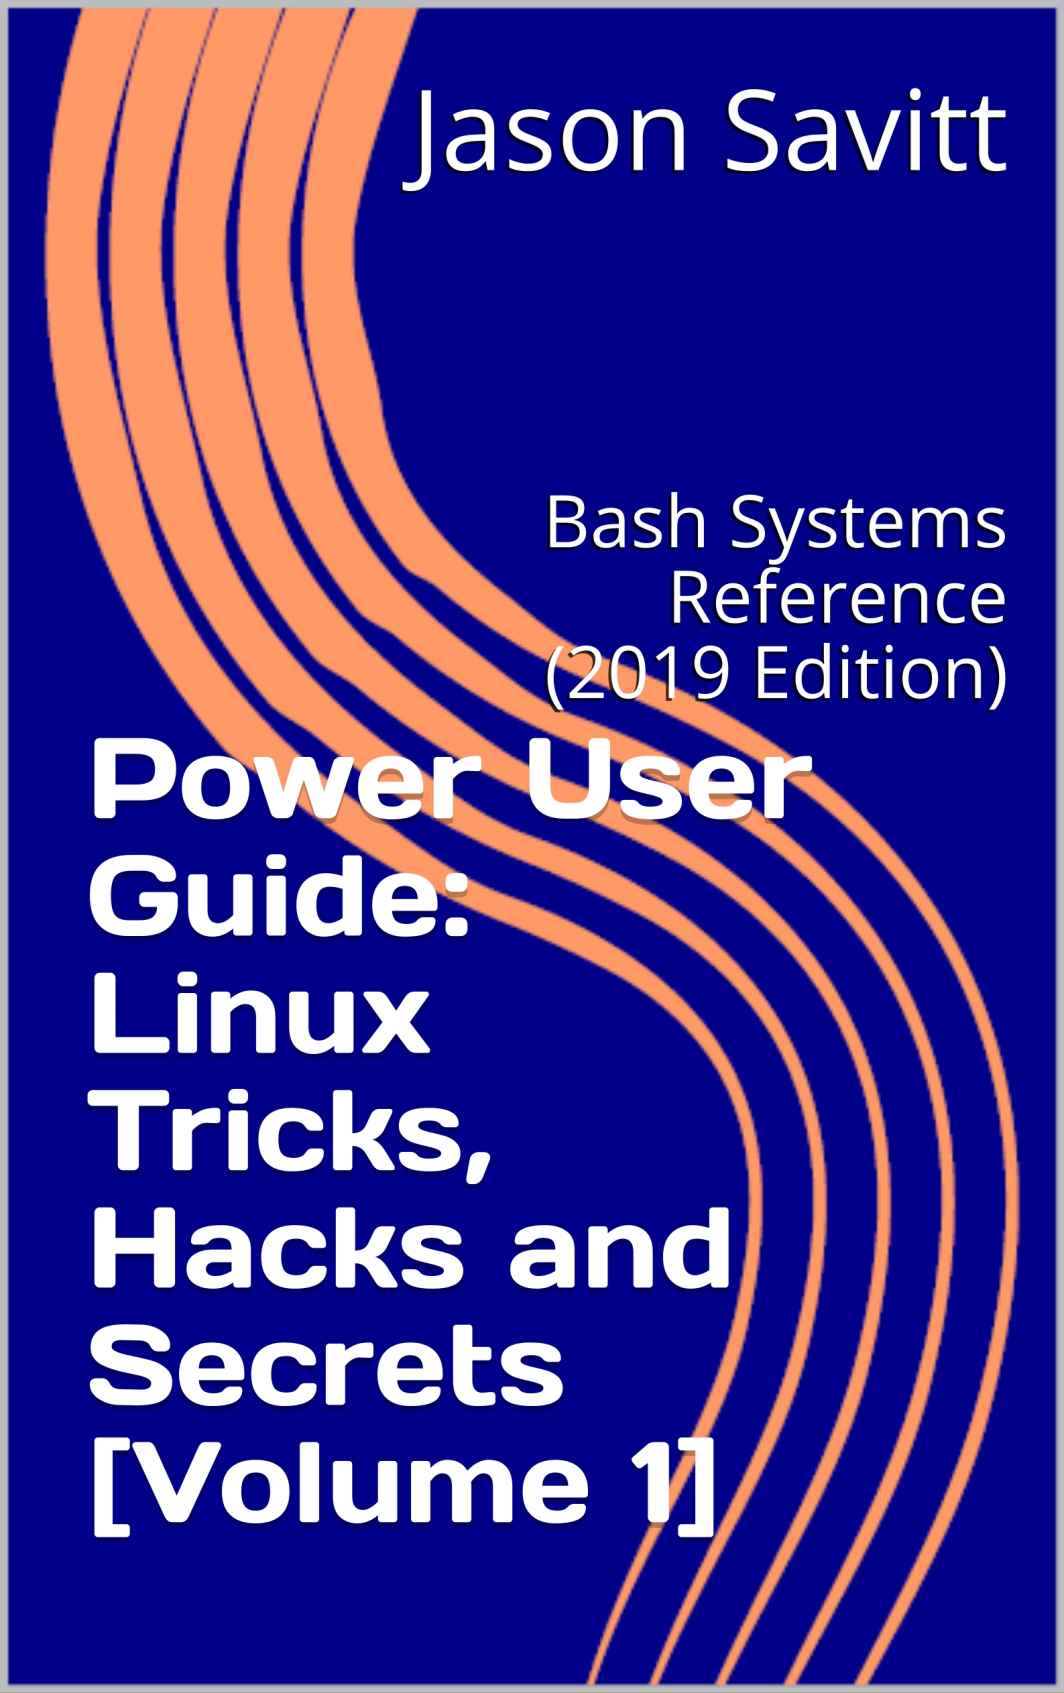 Power User Guide: Linux Tricks, Hacks and Secrets [Volume 1]: Bash Systems Reference (2019 Edition)